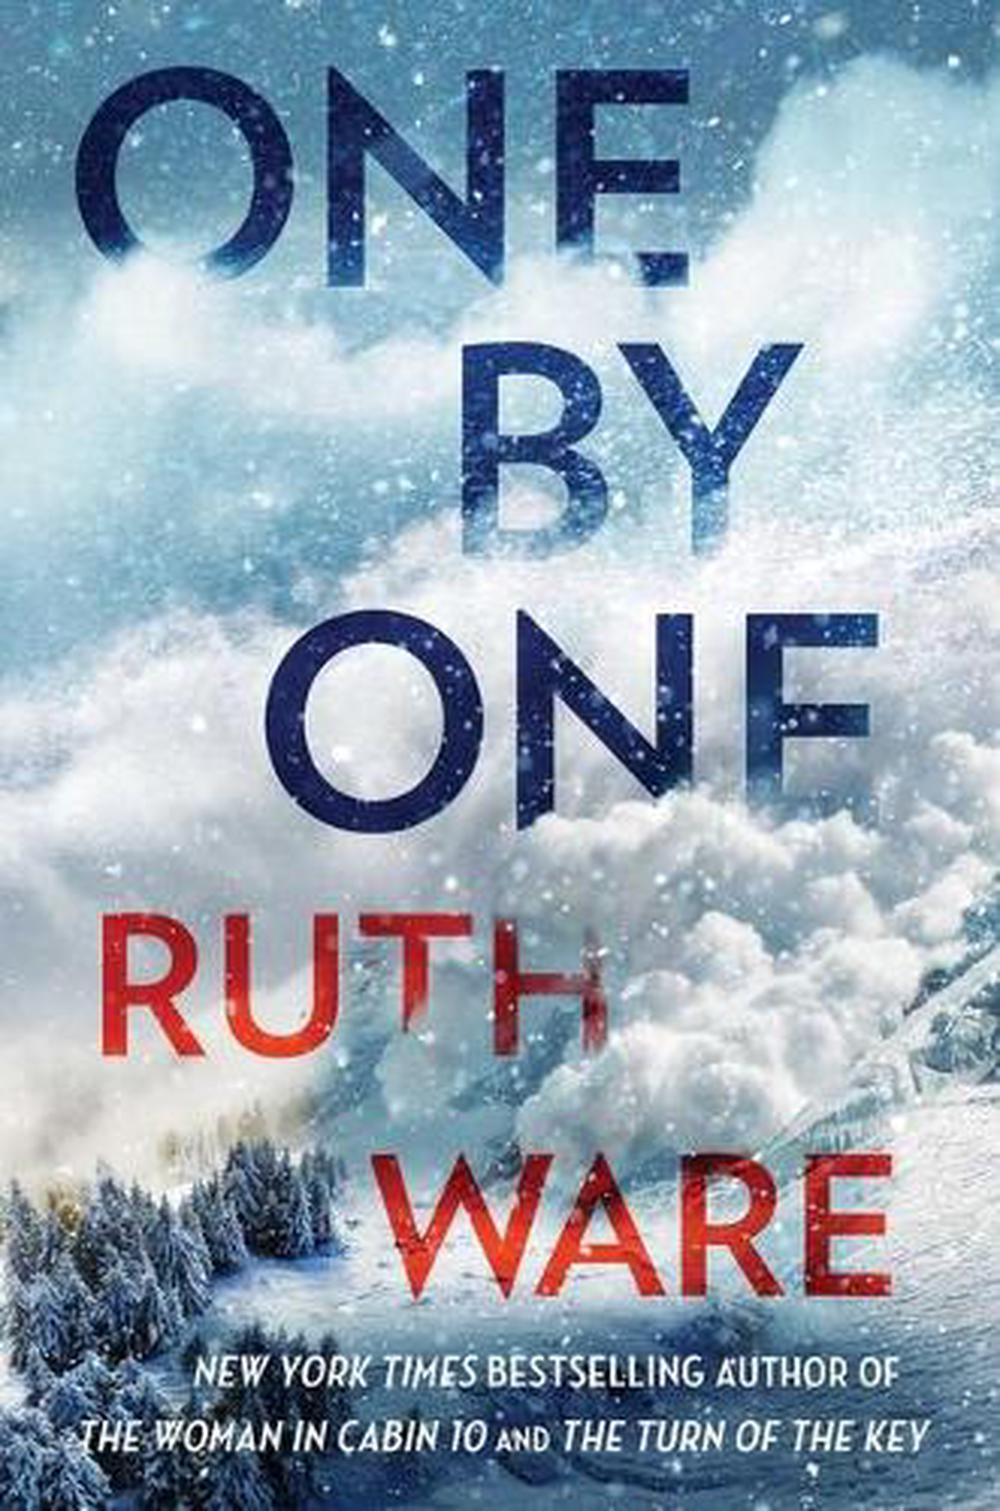 ruth ware one by one review